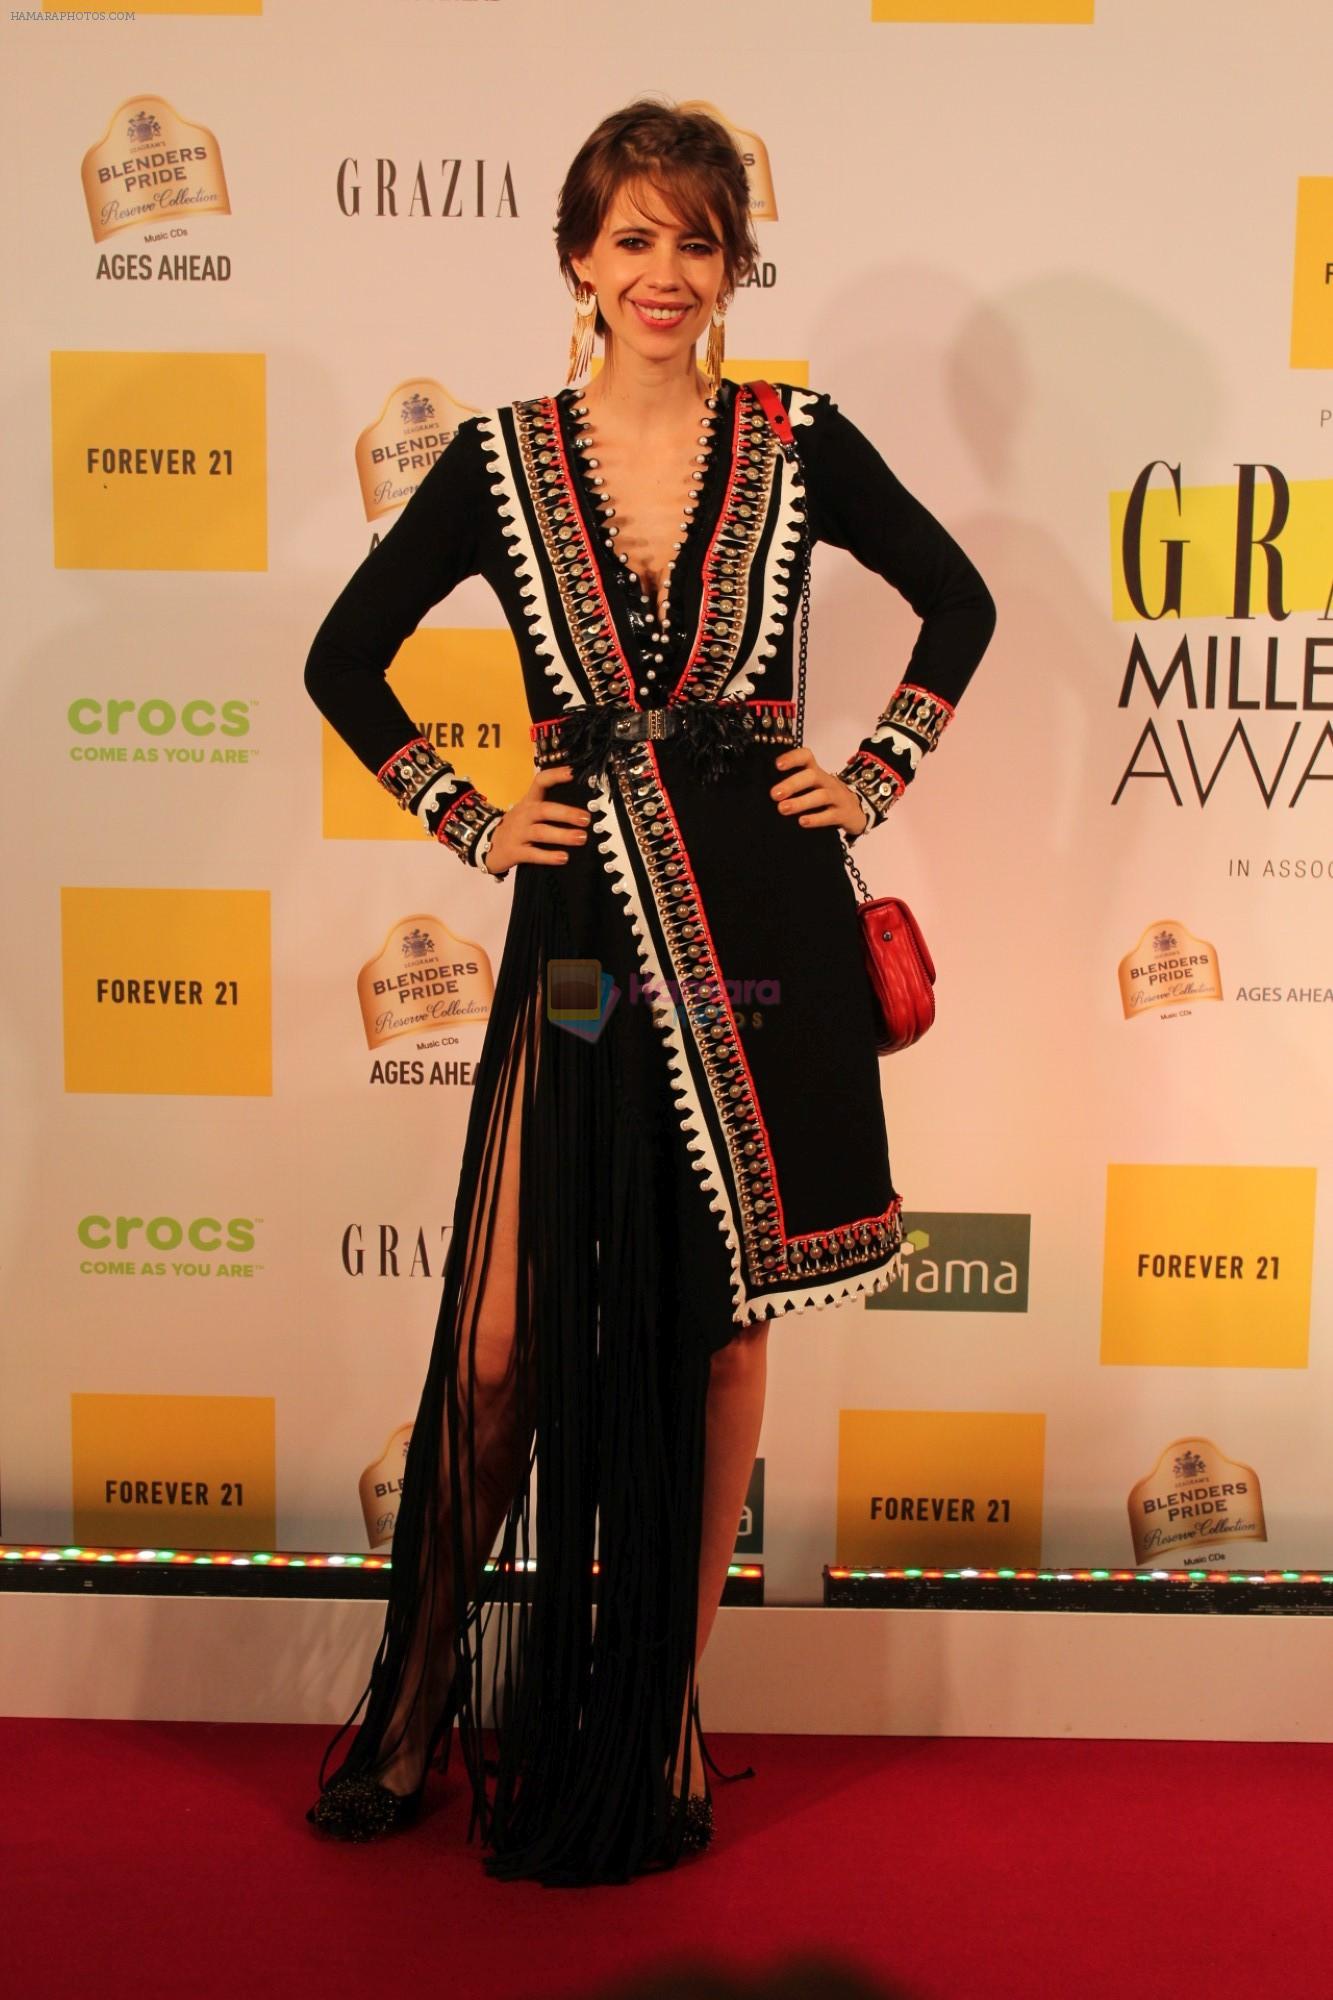 Kalki Koechlin at the Red Carpet of 1st Edition of Grazia Millennial Awards on 19th June 2019